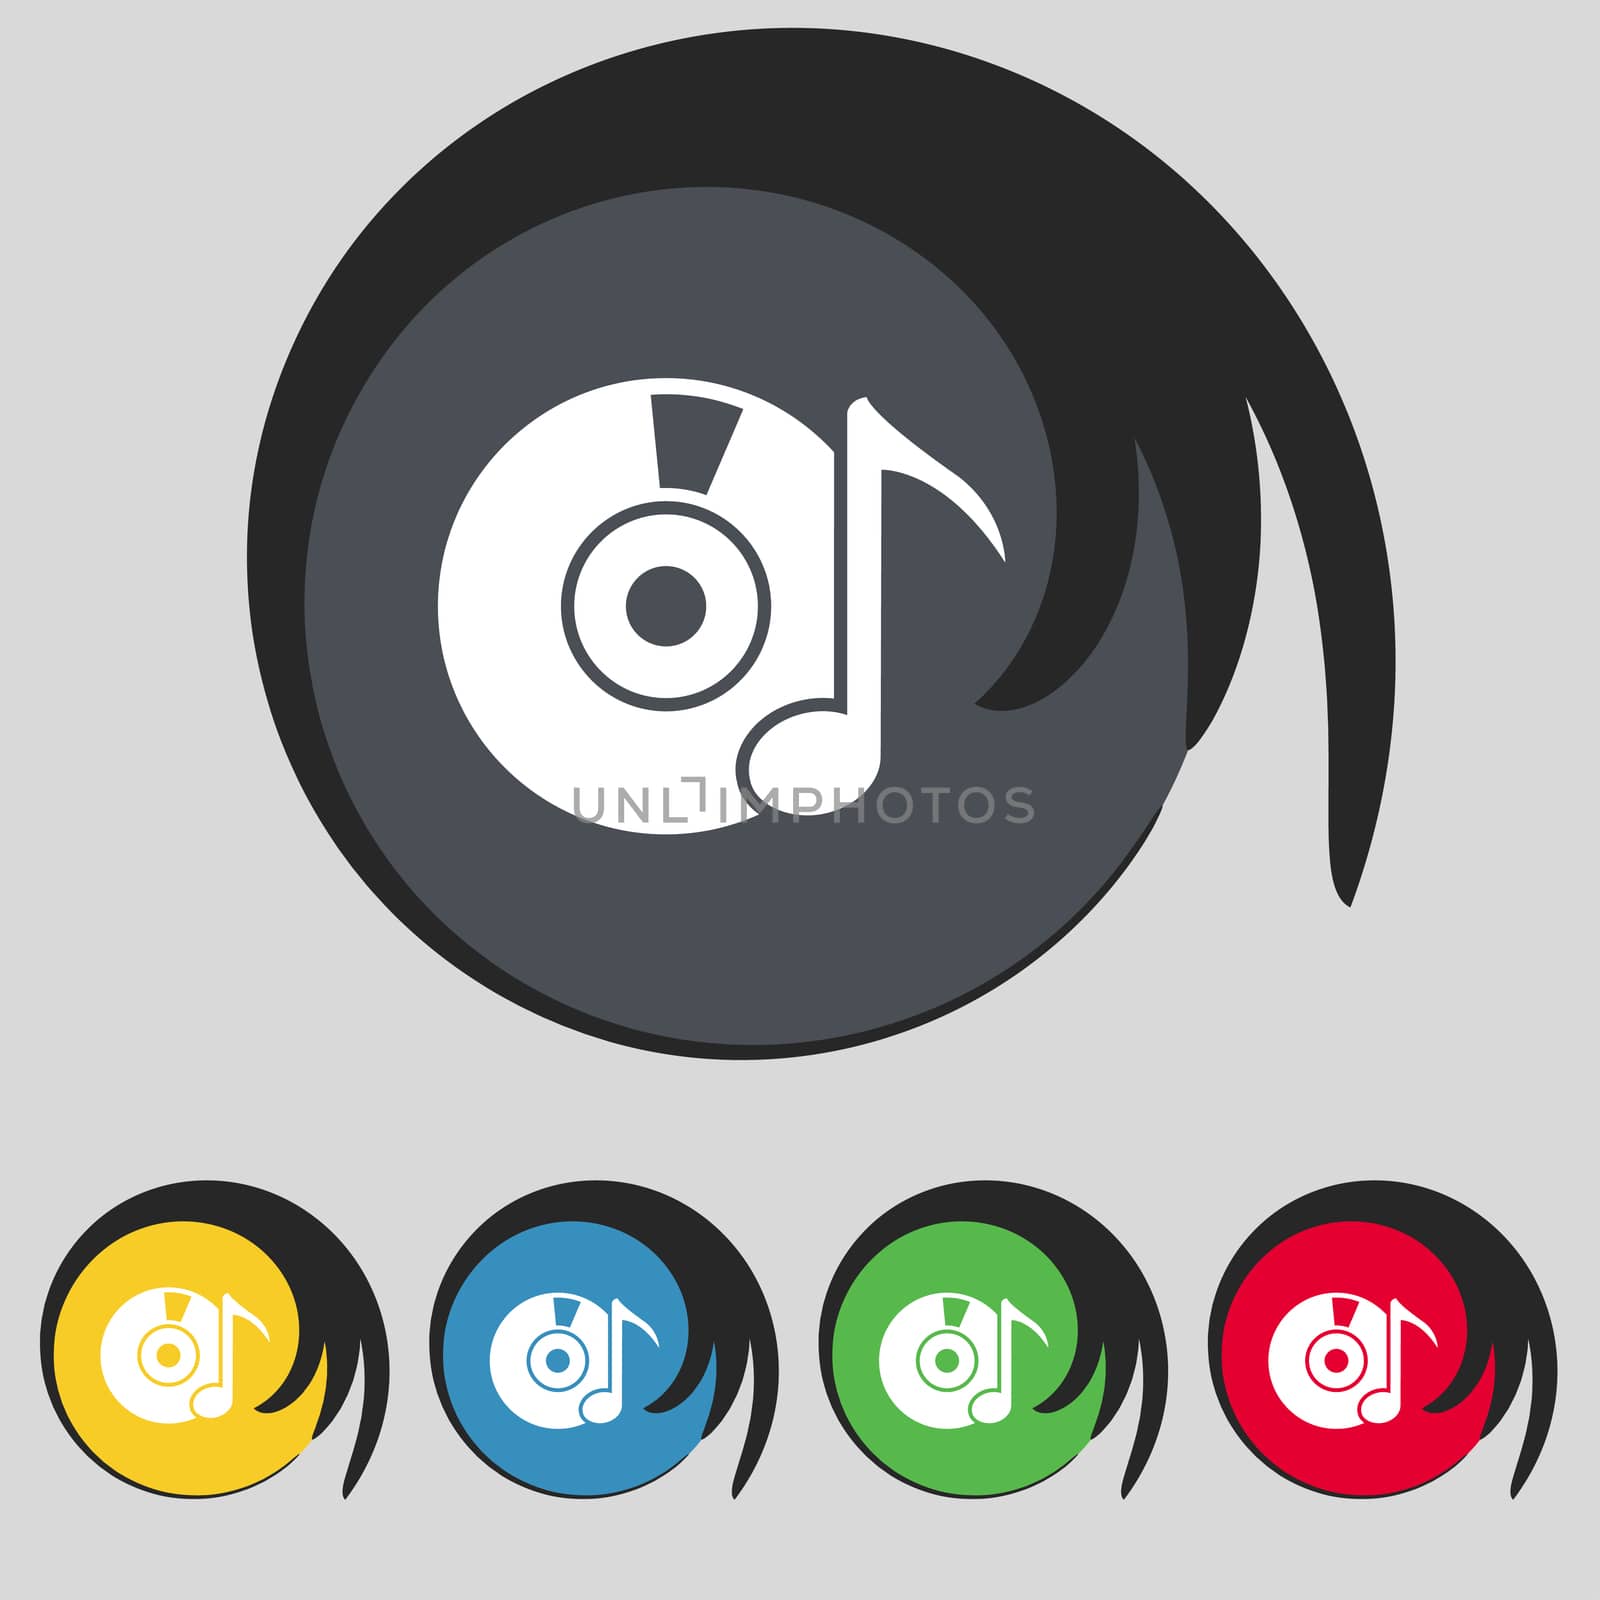 CD or DVD icon sign. Symbol on five colored buttons. illustration